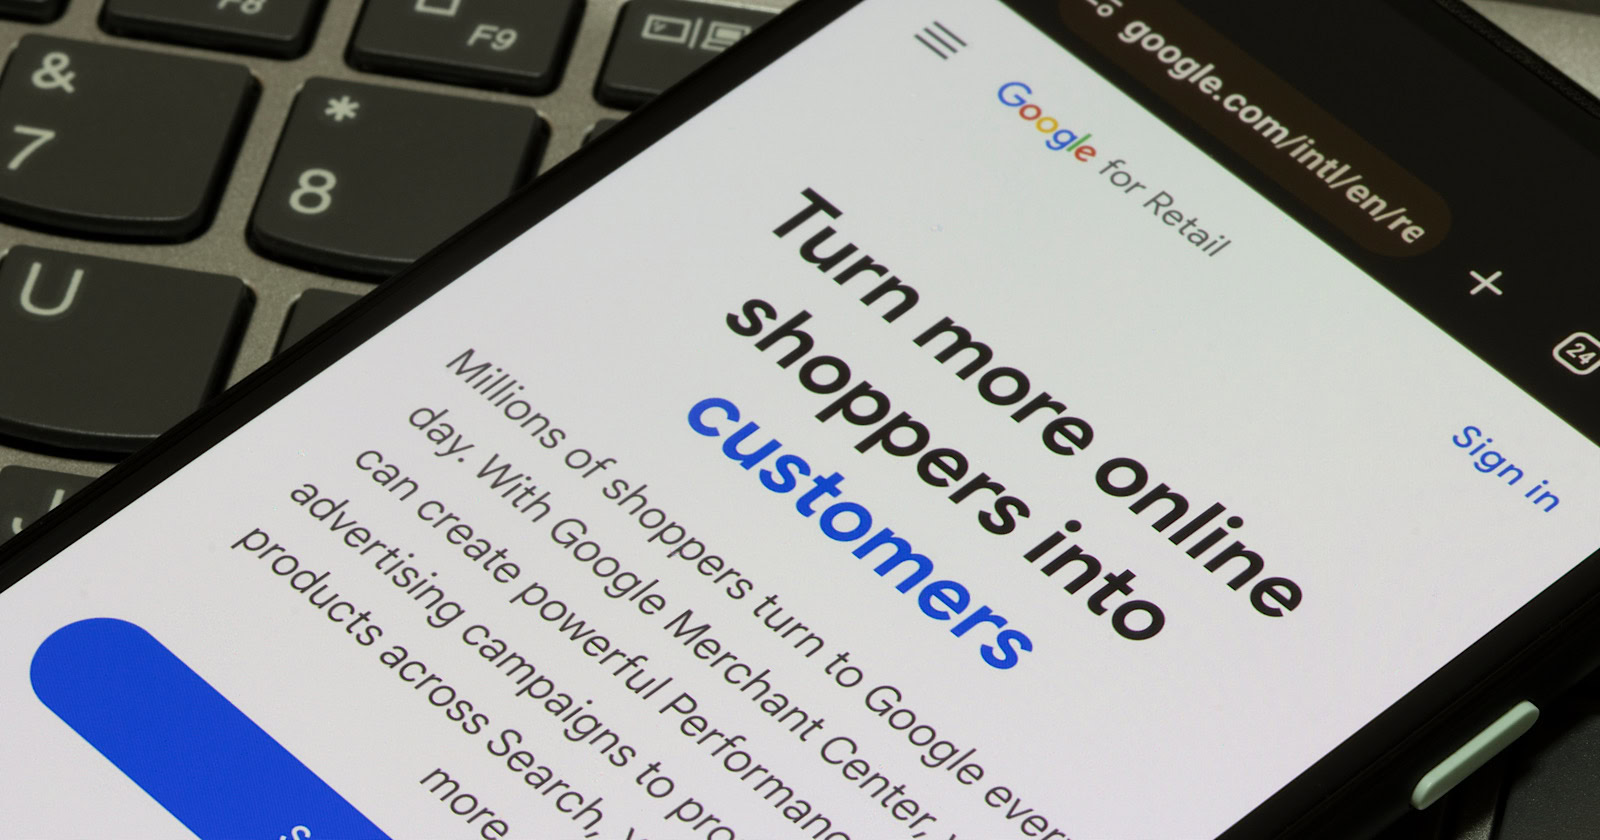 Google Performance Max advertising campaigns is seen on the webpage of Google for Retail on a smartphone.